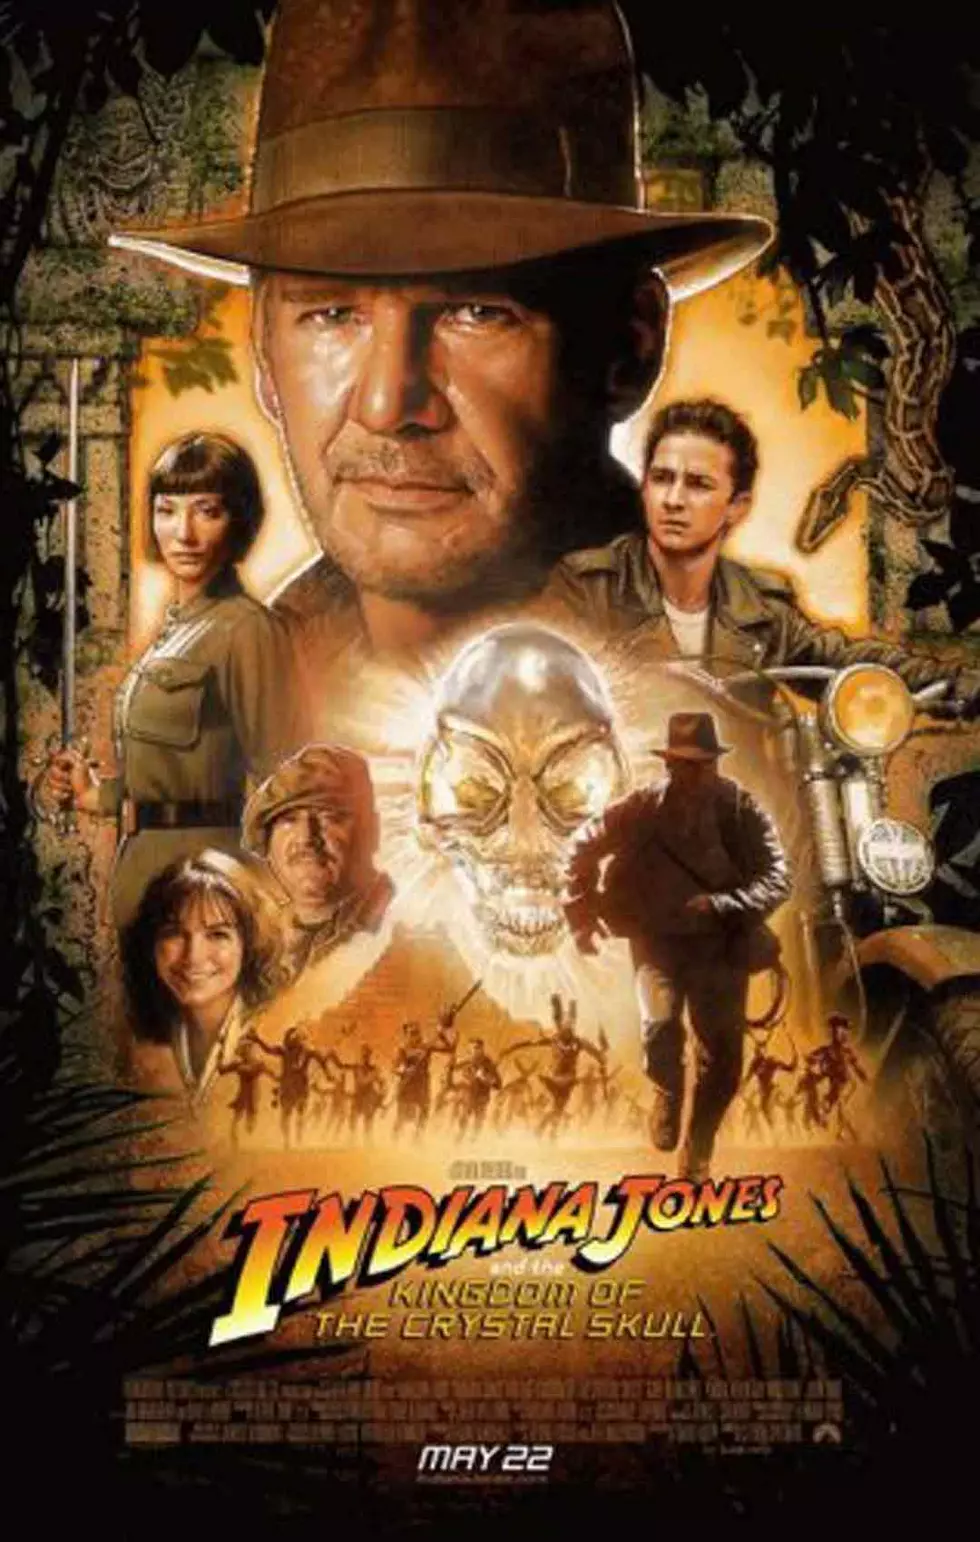 Indiana Jones' Movies Ranked From Worst to Best